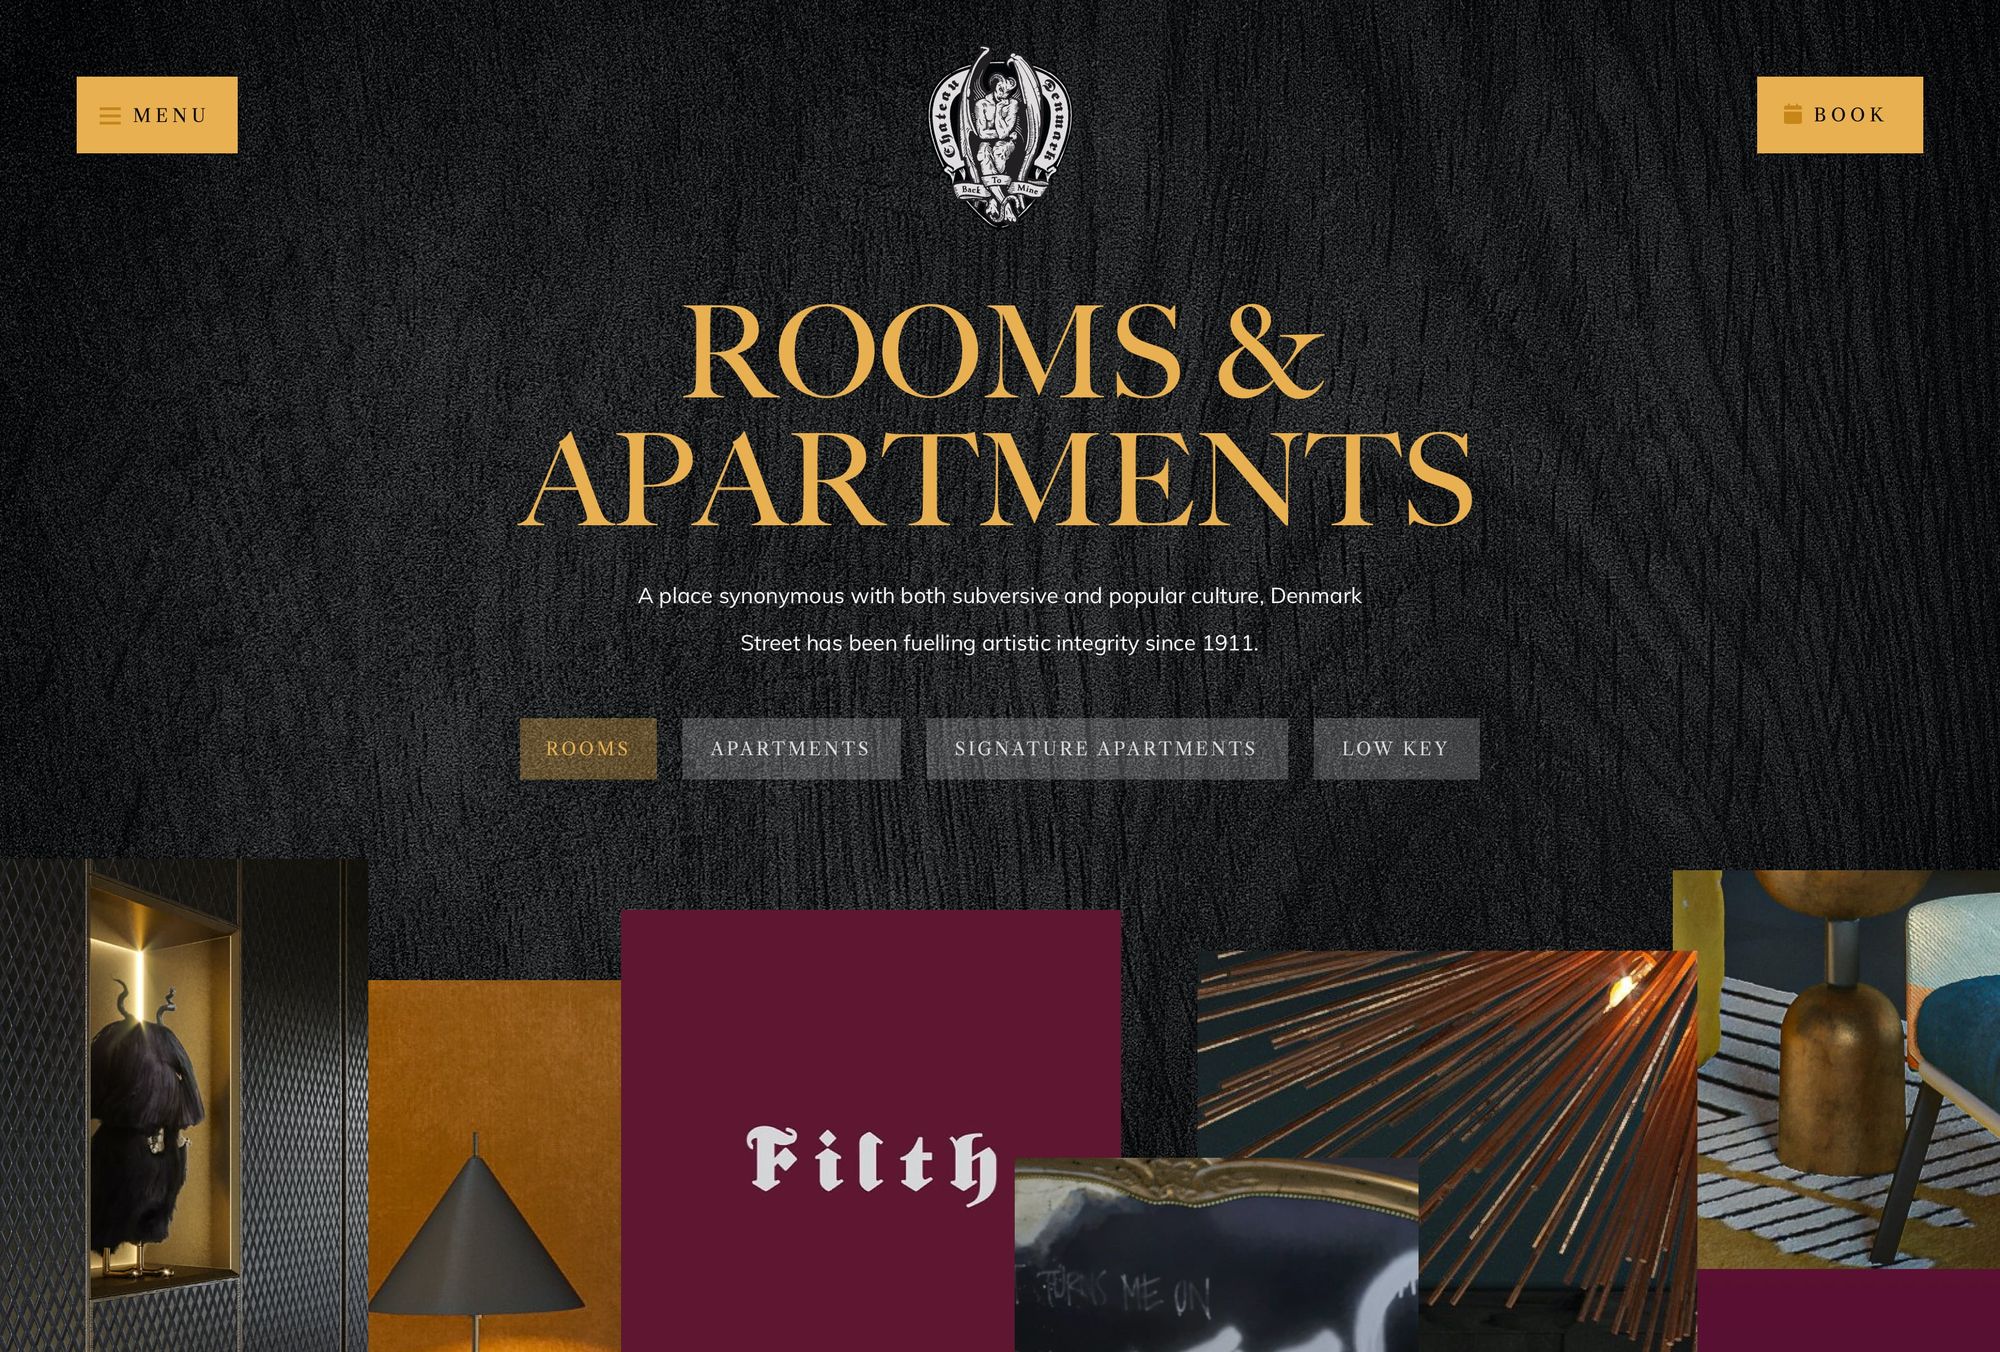 "Rooms & Apartments" page on the Chateau Denmark website